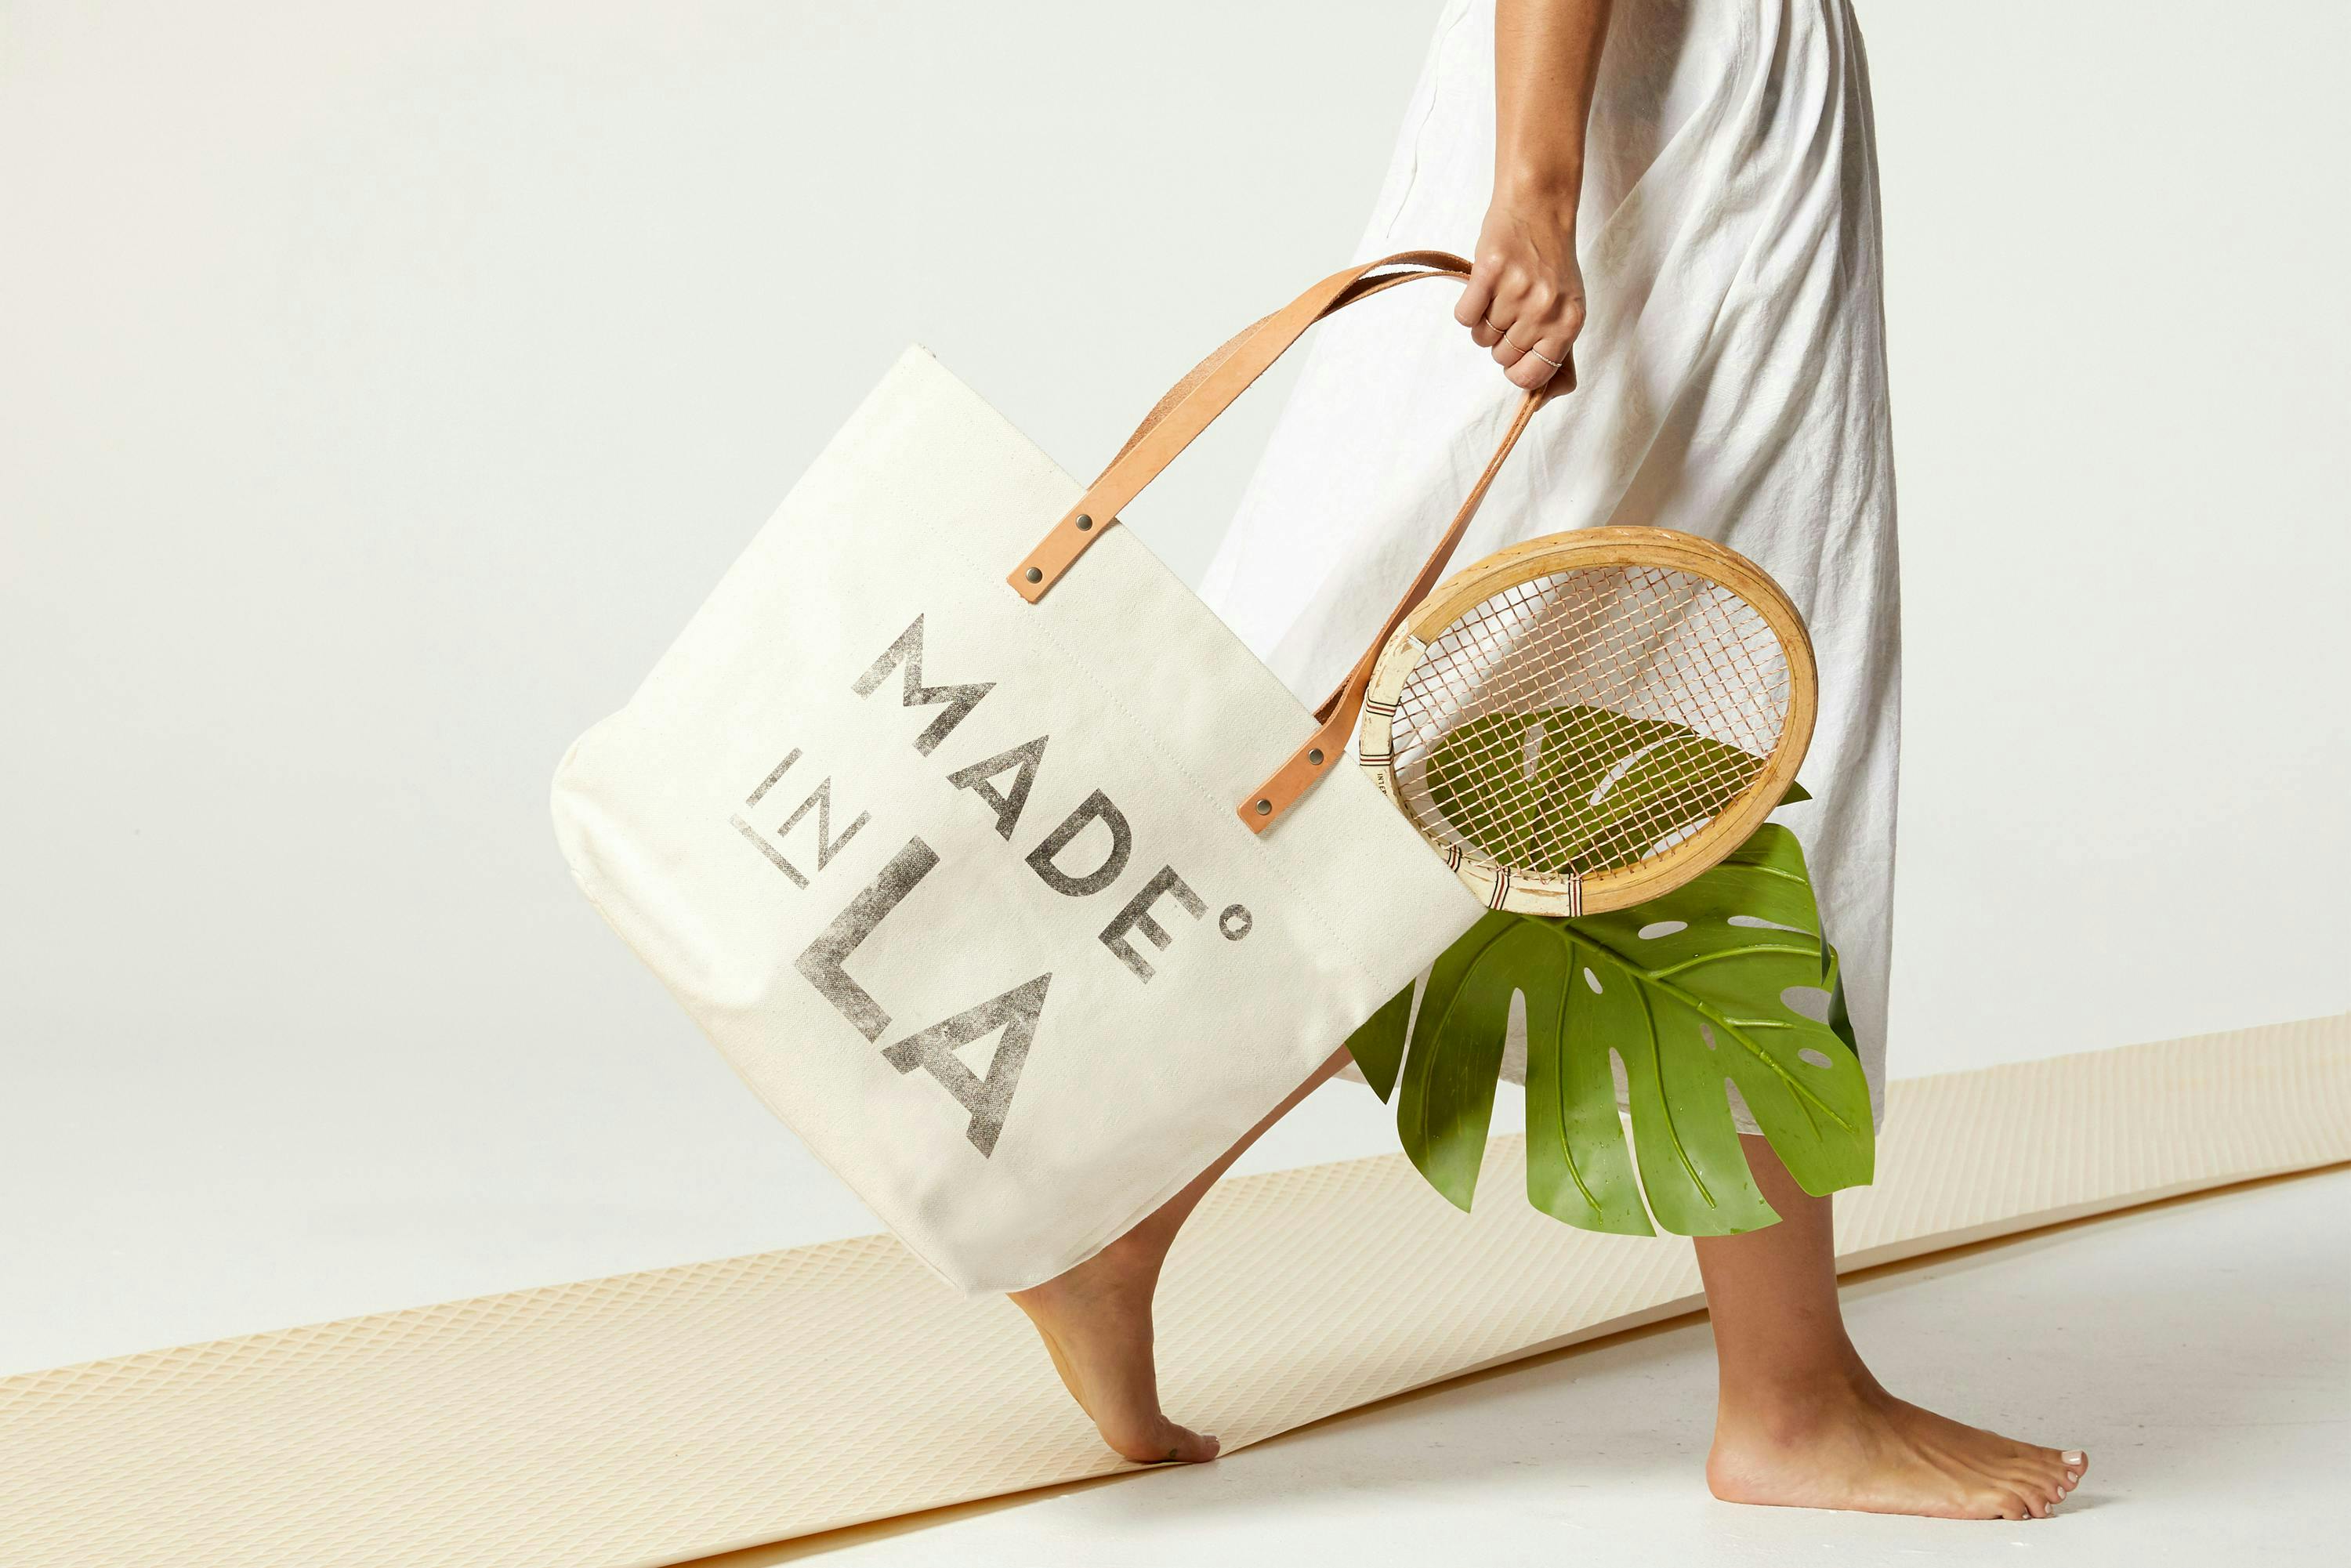 canvas tote bag for Cisco's company made in LA  photographed with a racket and monstera leave being held by a woman in a long dress barefoot 